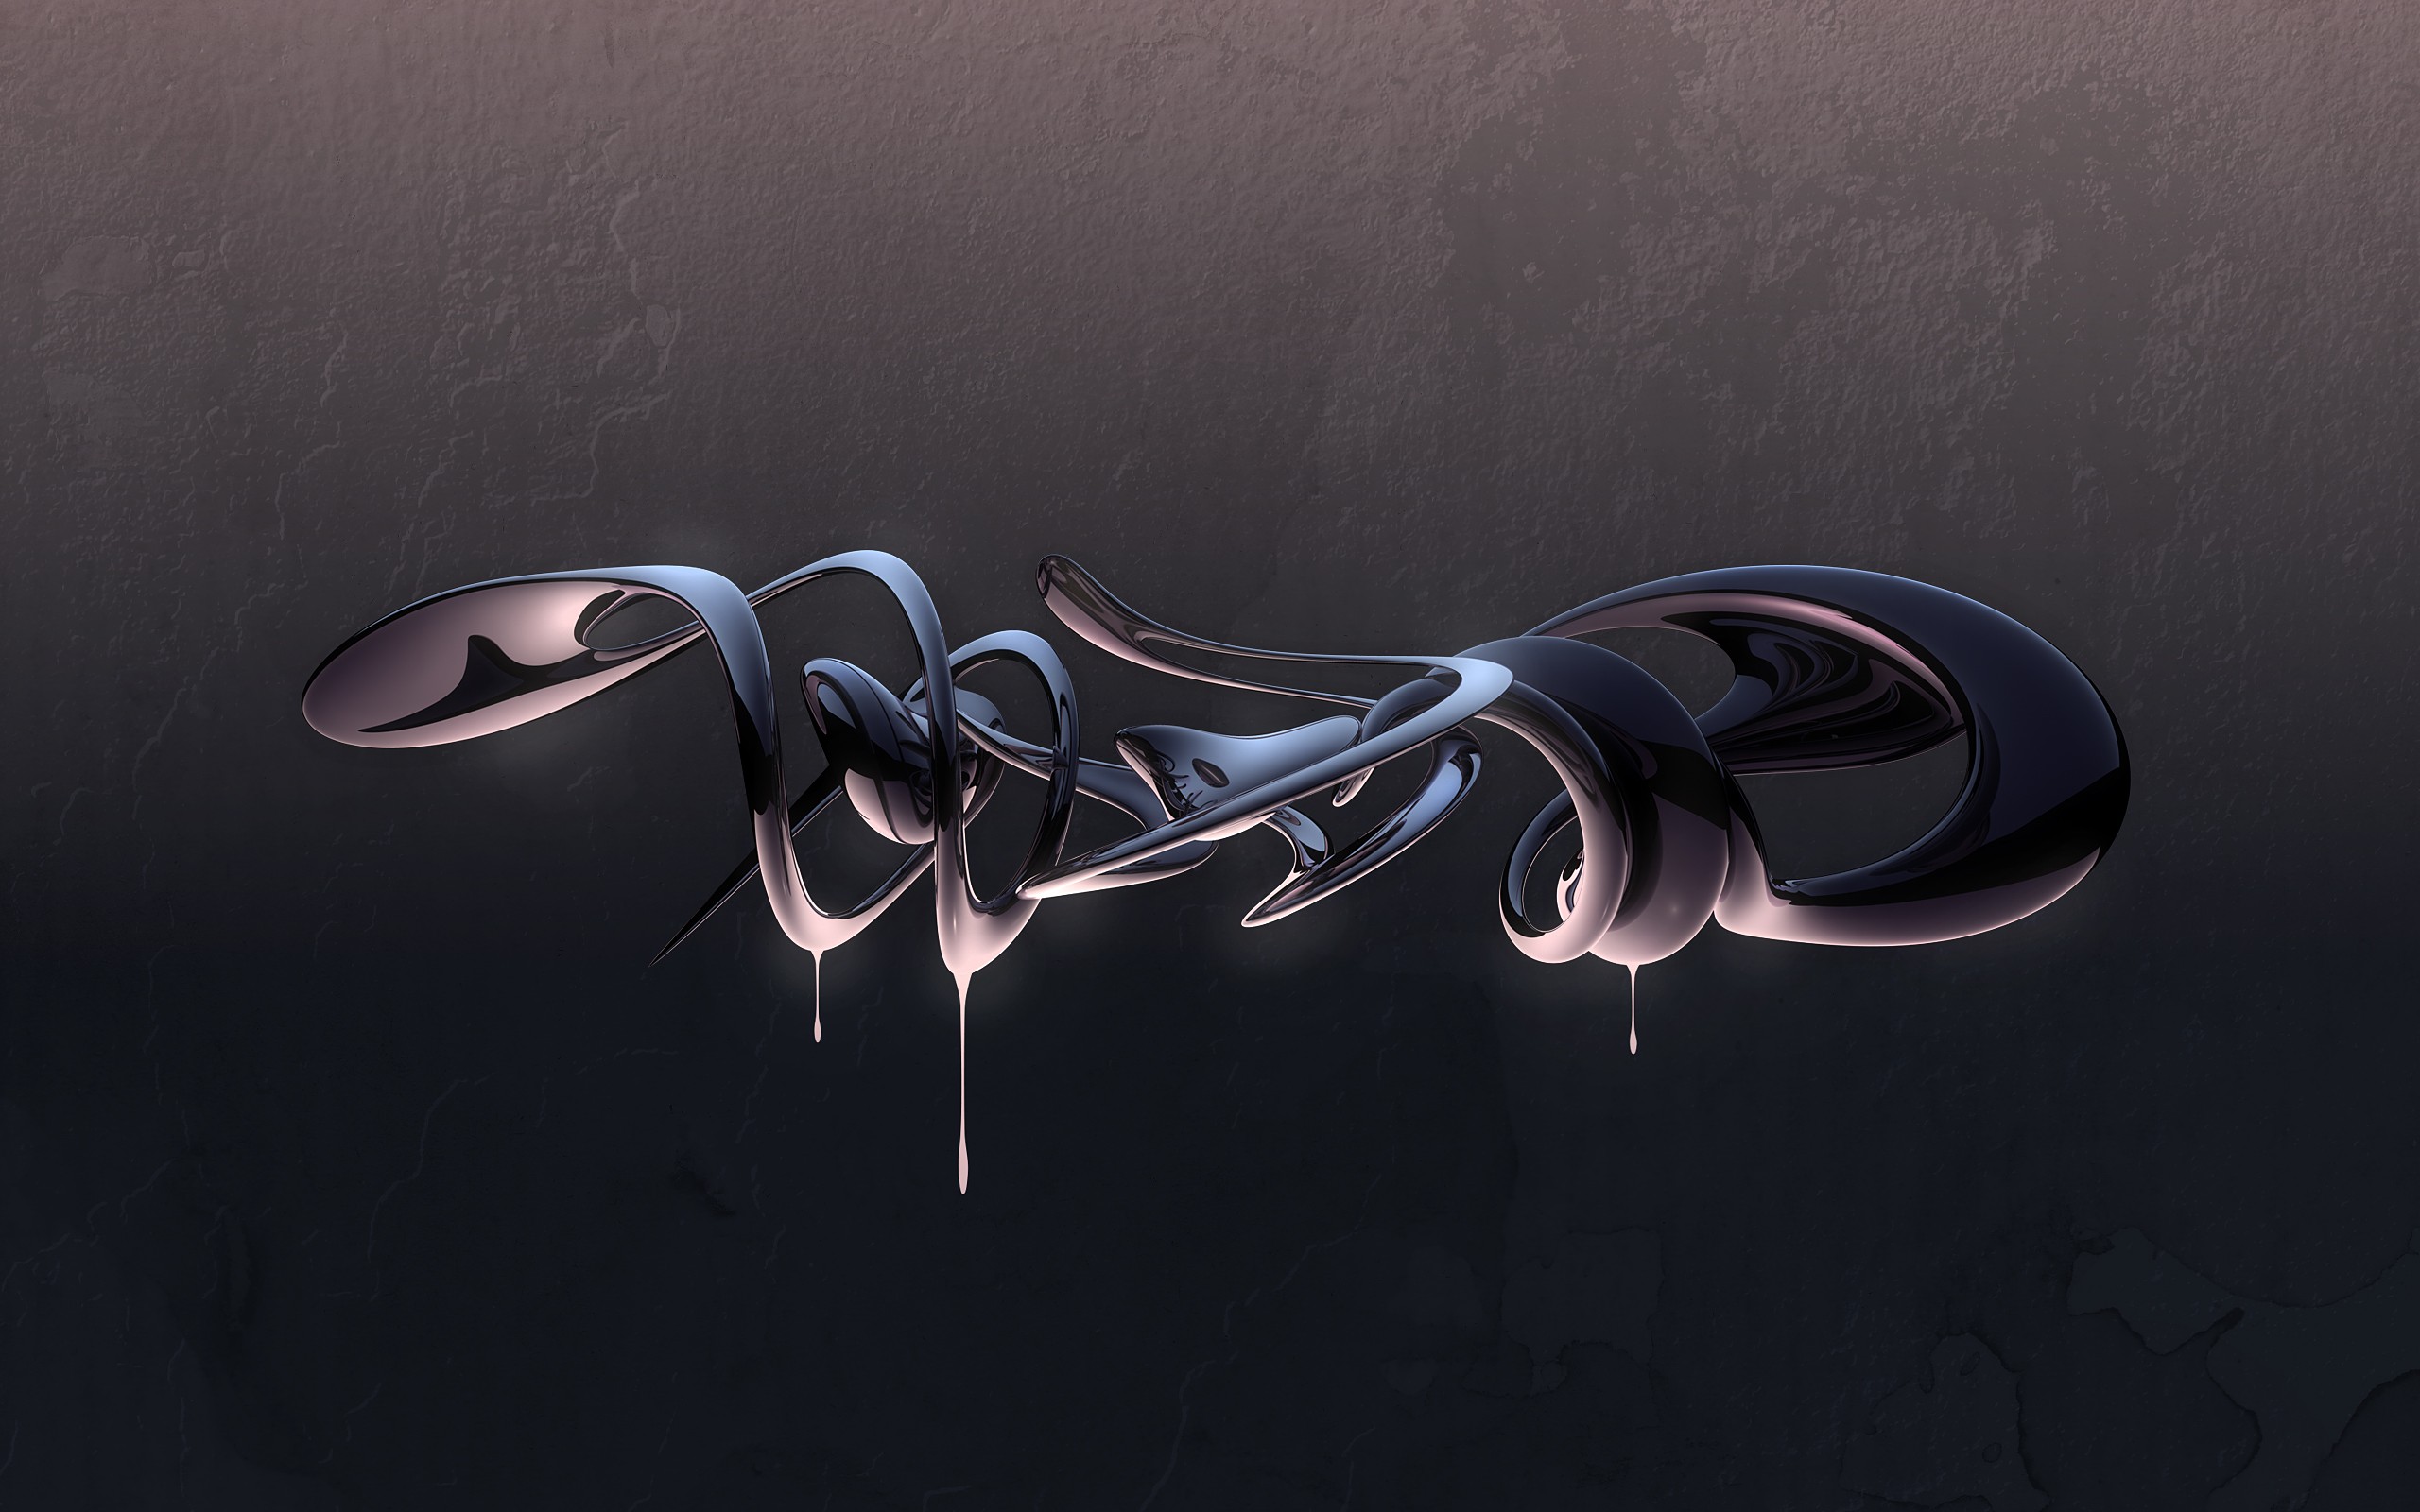 The Dripping Silver Abstract Wallpaper